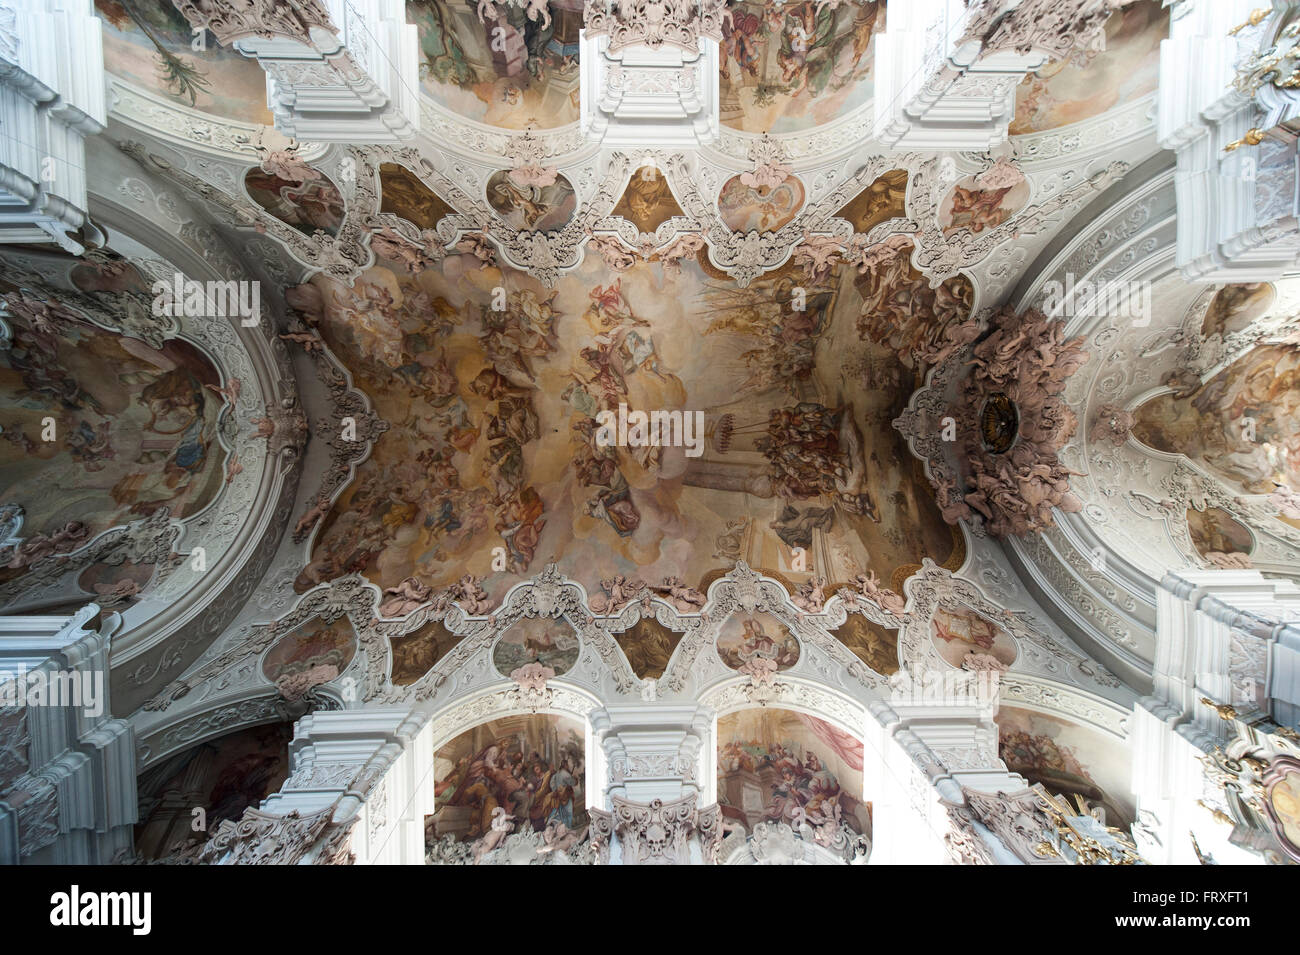 Interior view of the ceiling with fresco, Abbey church in Metten abbey, Metten, Bavarian Forest, Bavaria, Germany Stock Photo